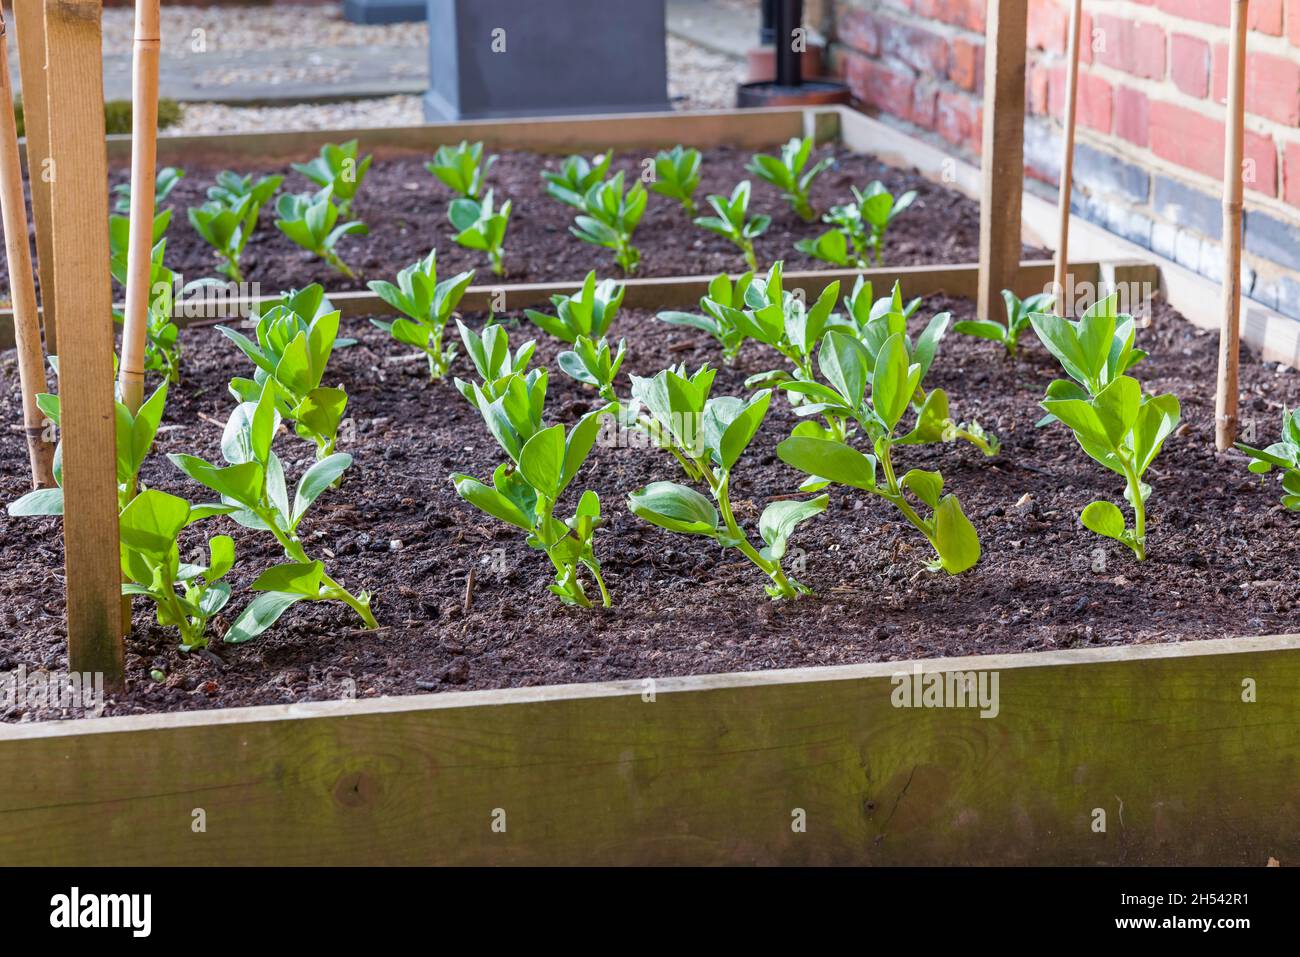 Sowing broad beans, fava been plant seedlings growing outside a house in a raised bed, UK garden Stock Photo